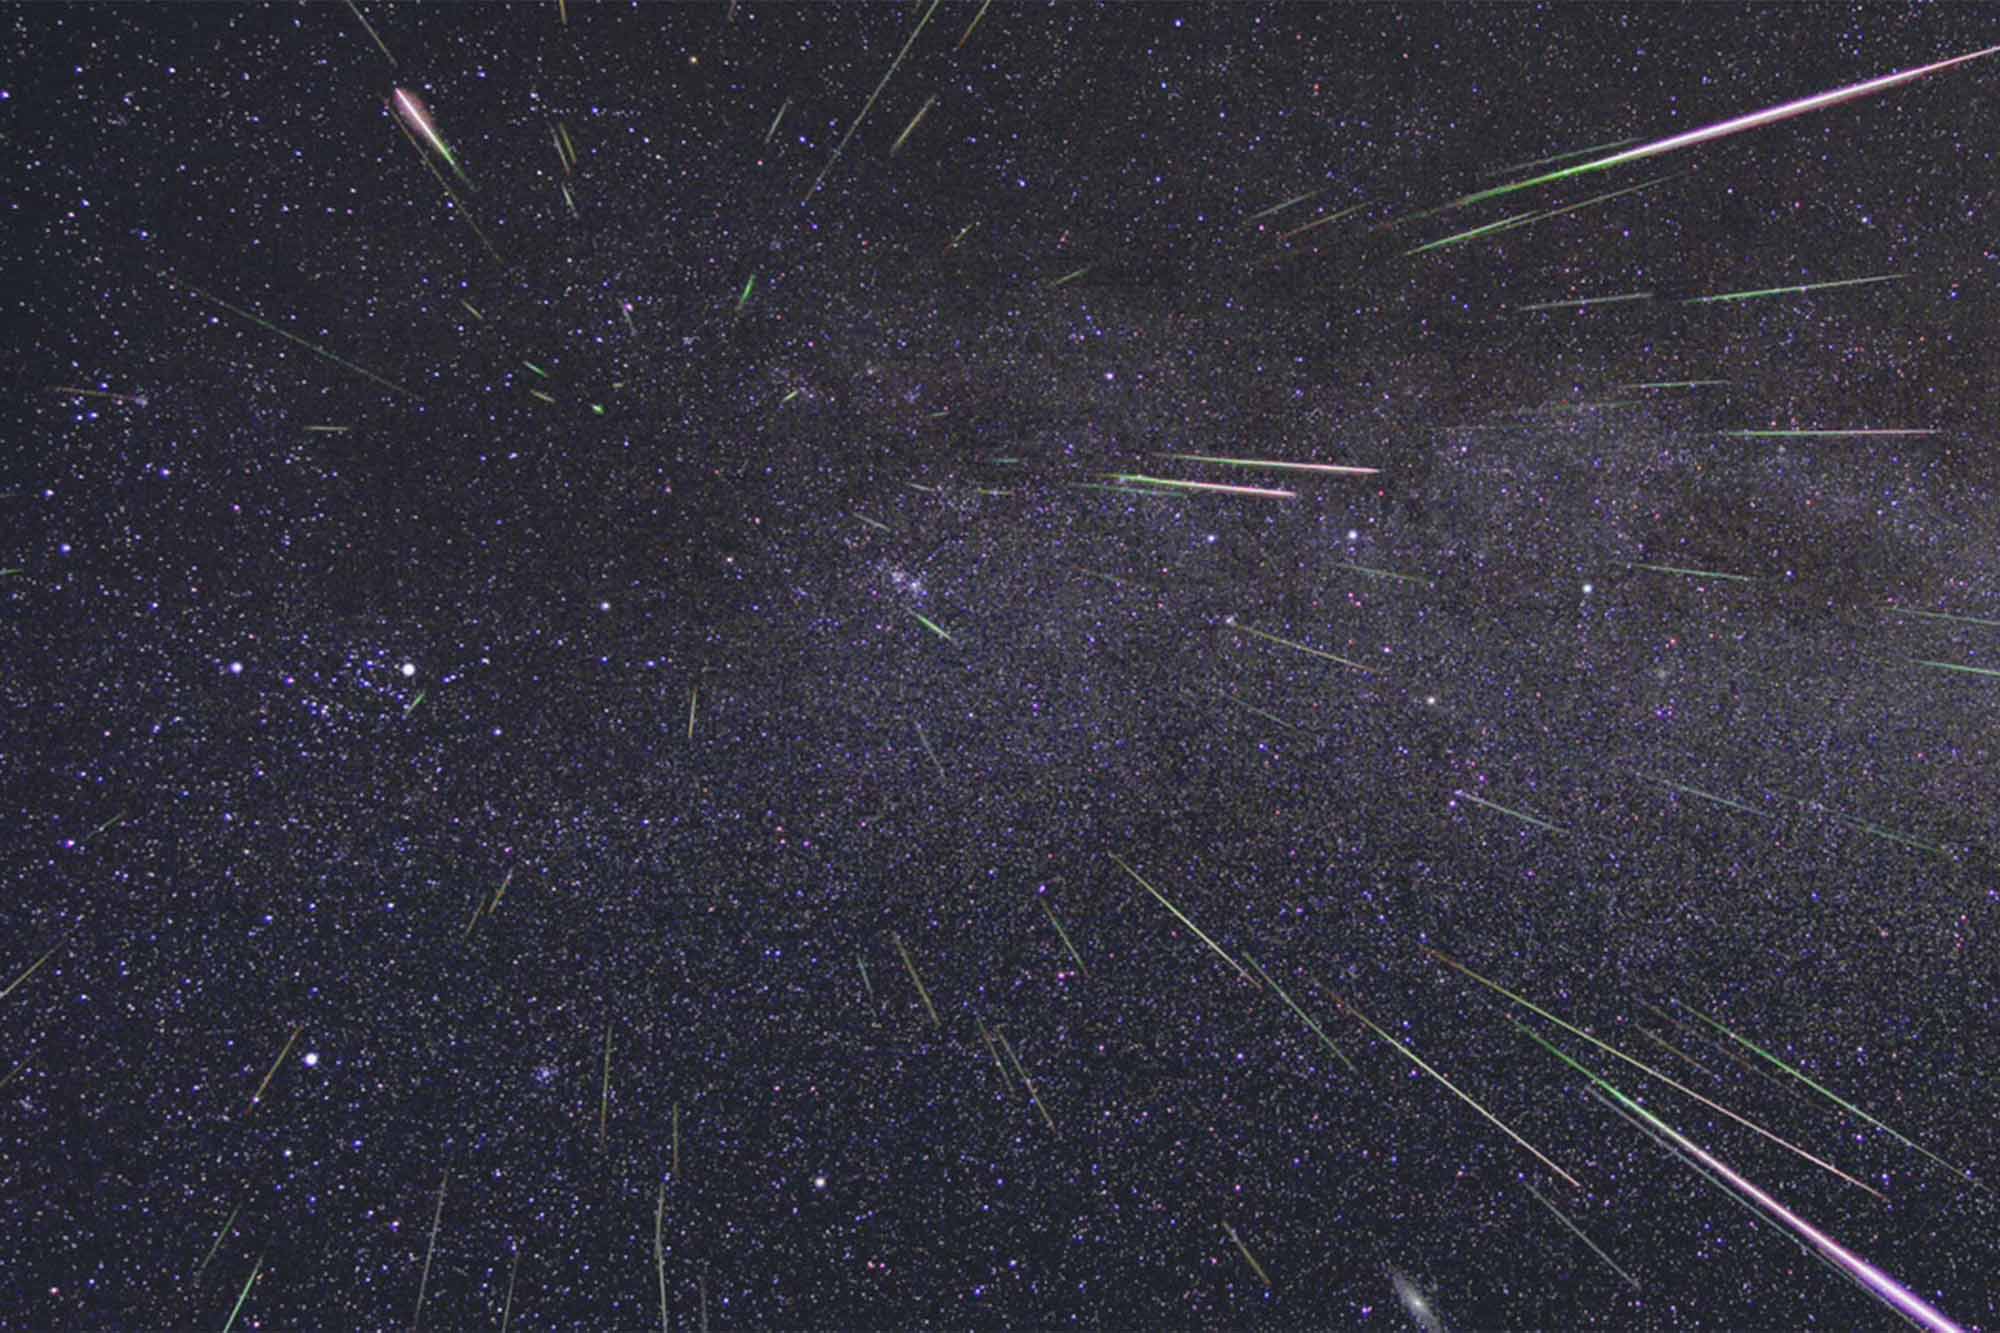 NASA image of a meteor shower